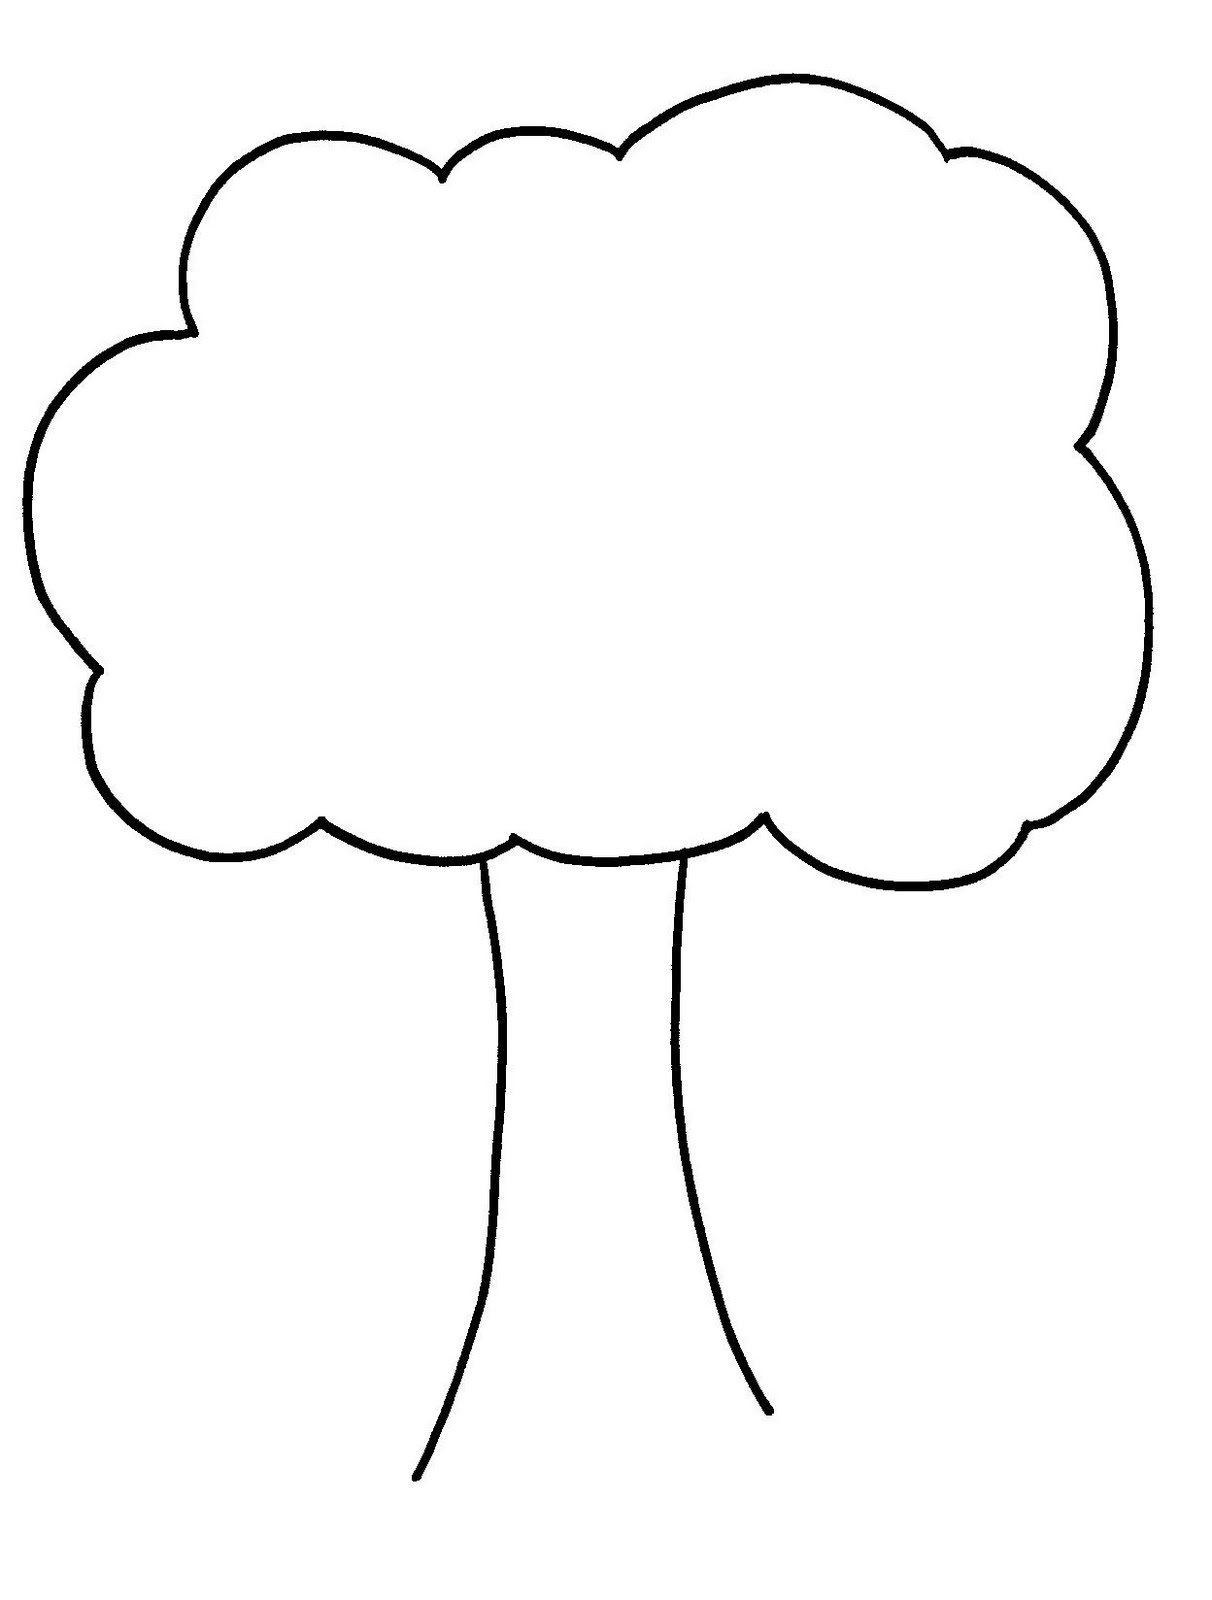 Printable Pictures Of Trees - Cliparts.co